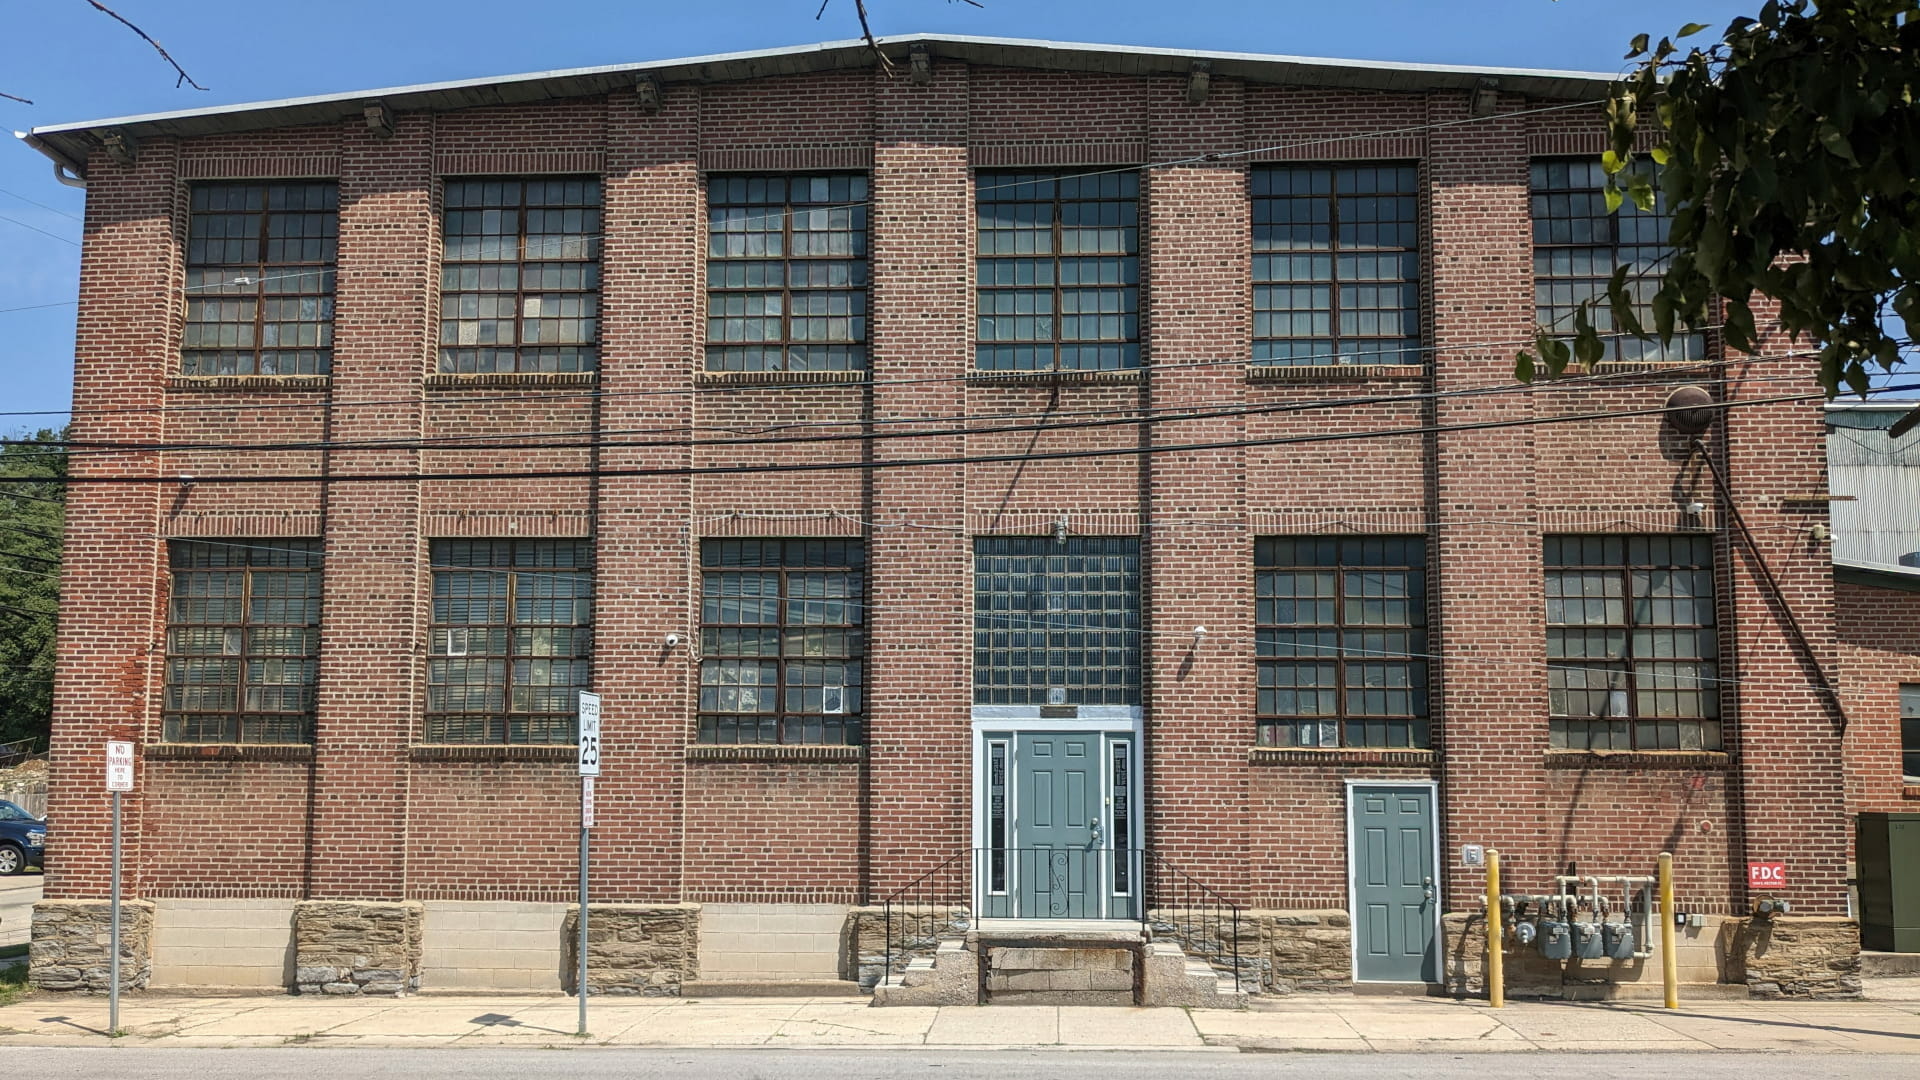 Photo of the East West Label Company building in Conshohocken, PA